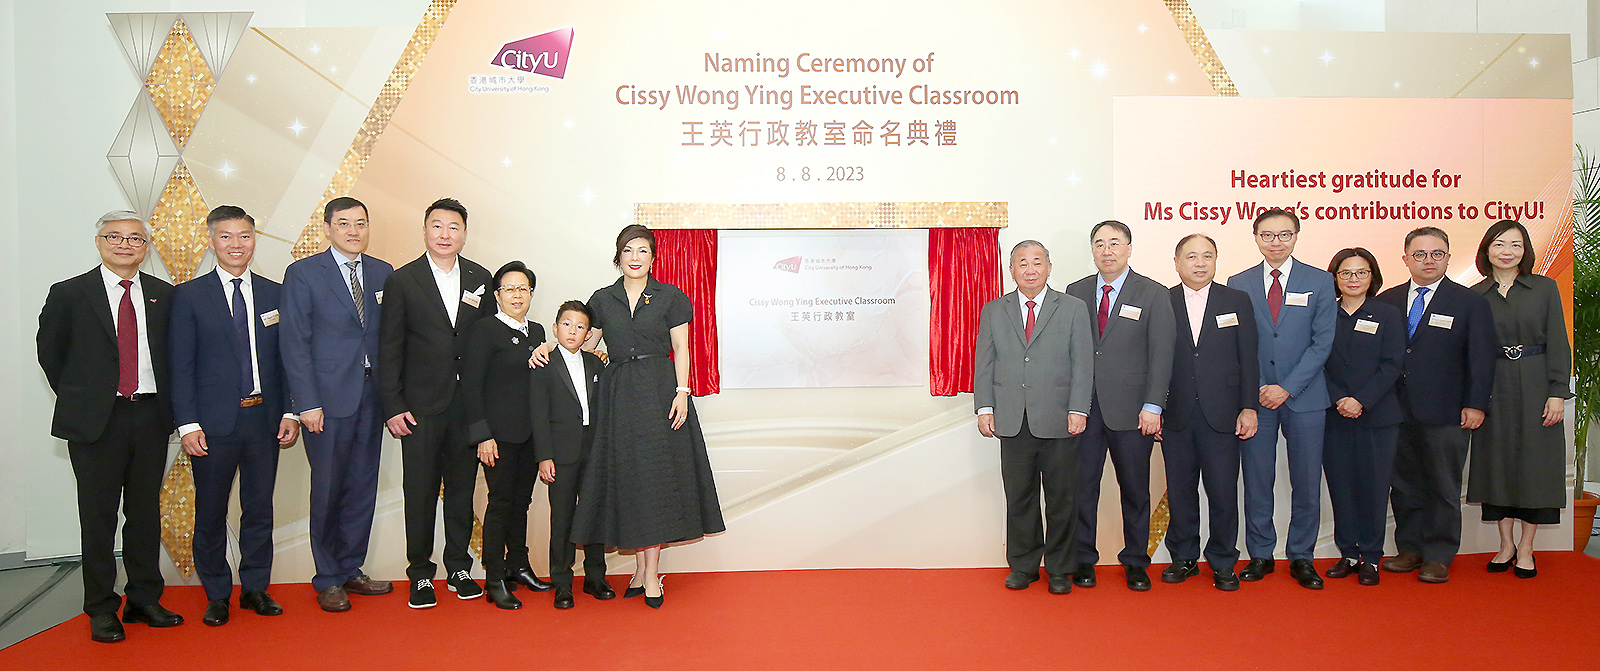 CityU representatives and attending guests witness the official naming of “Cissy Wong Ying Executive Classroom”. 